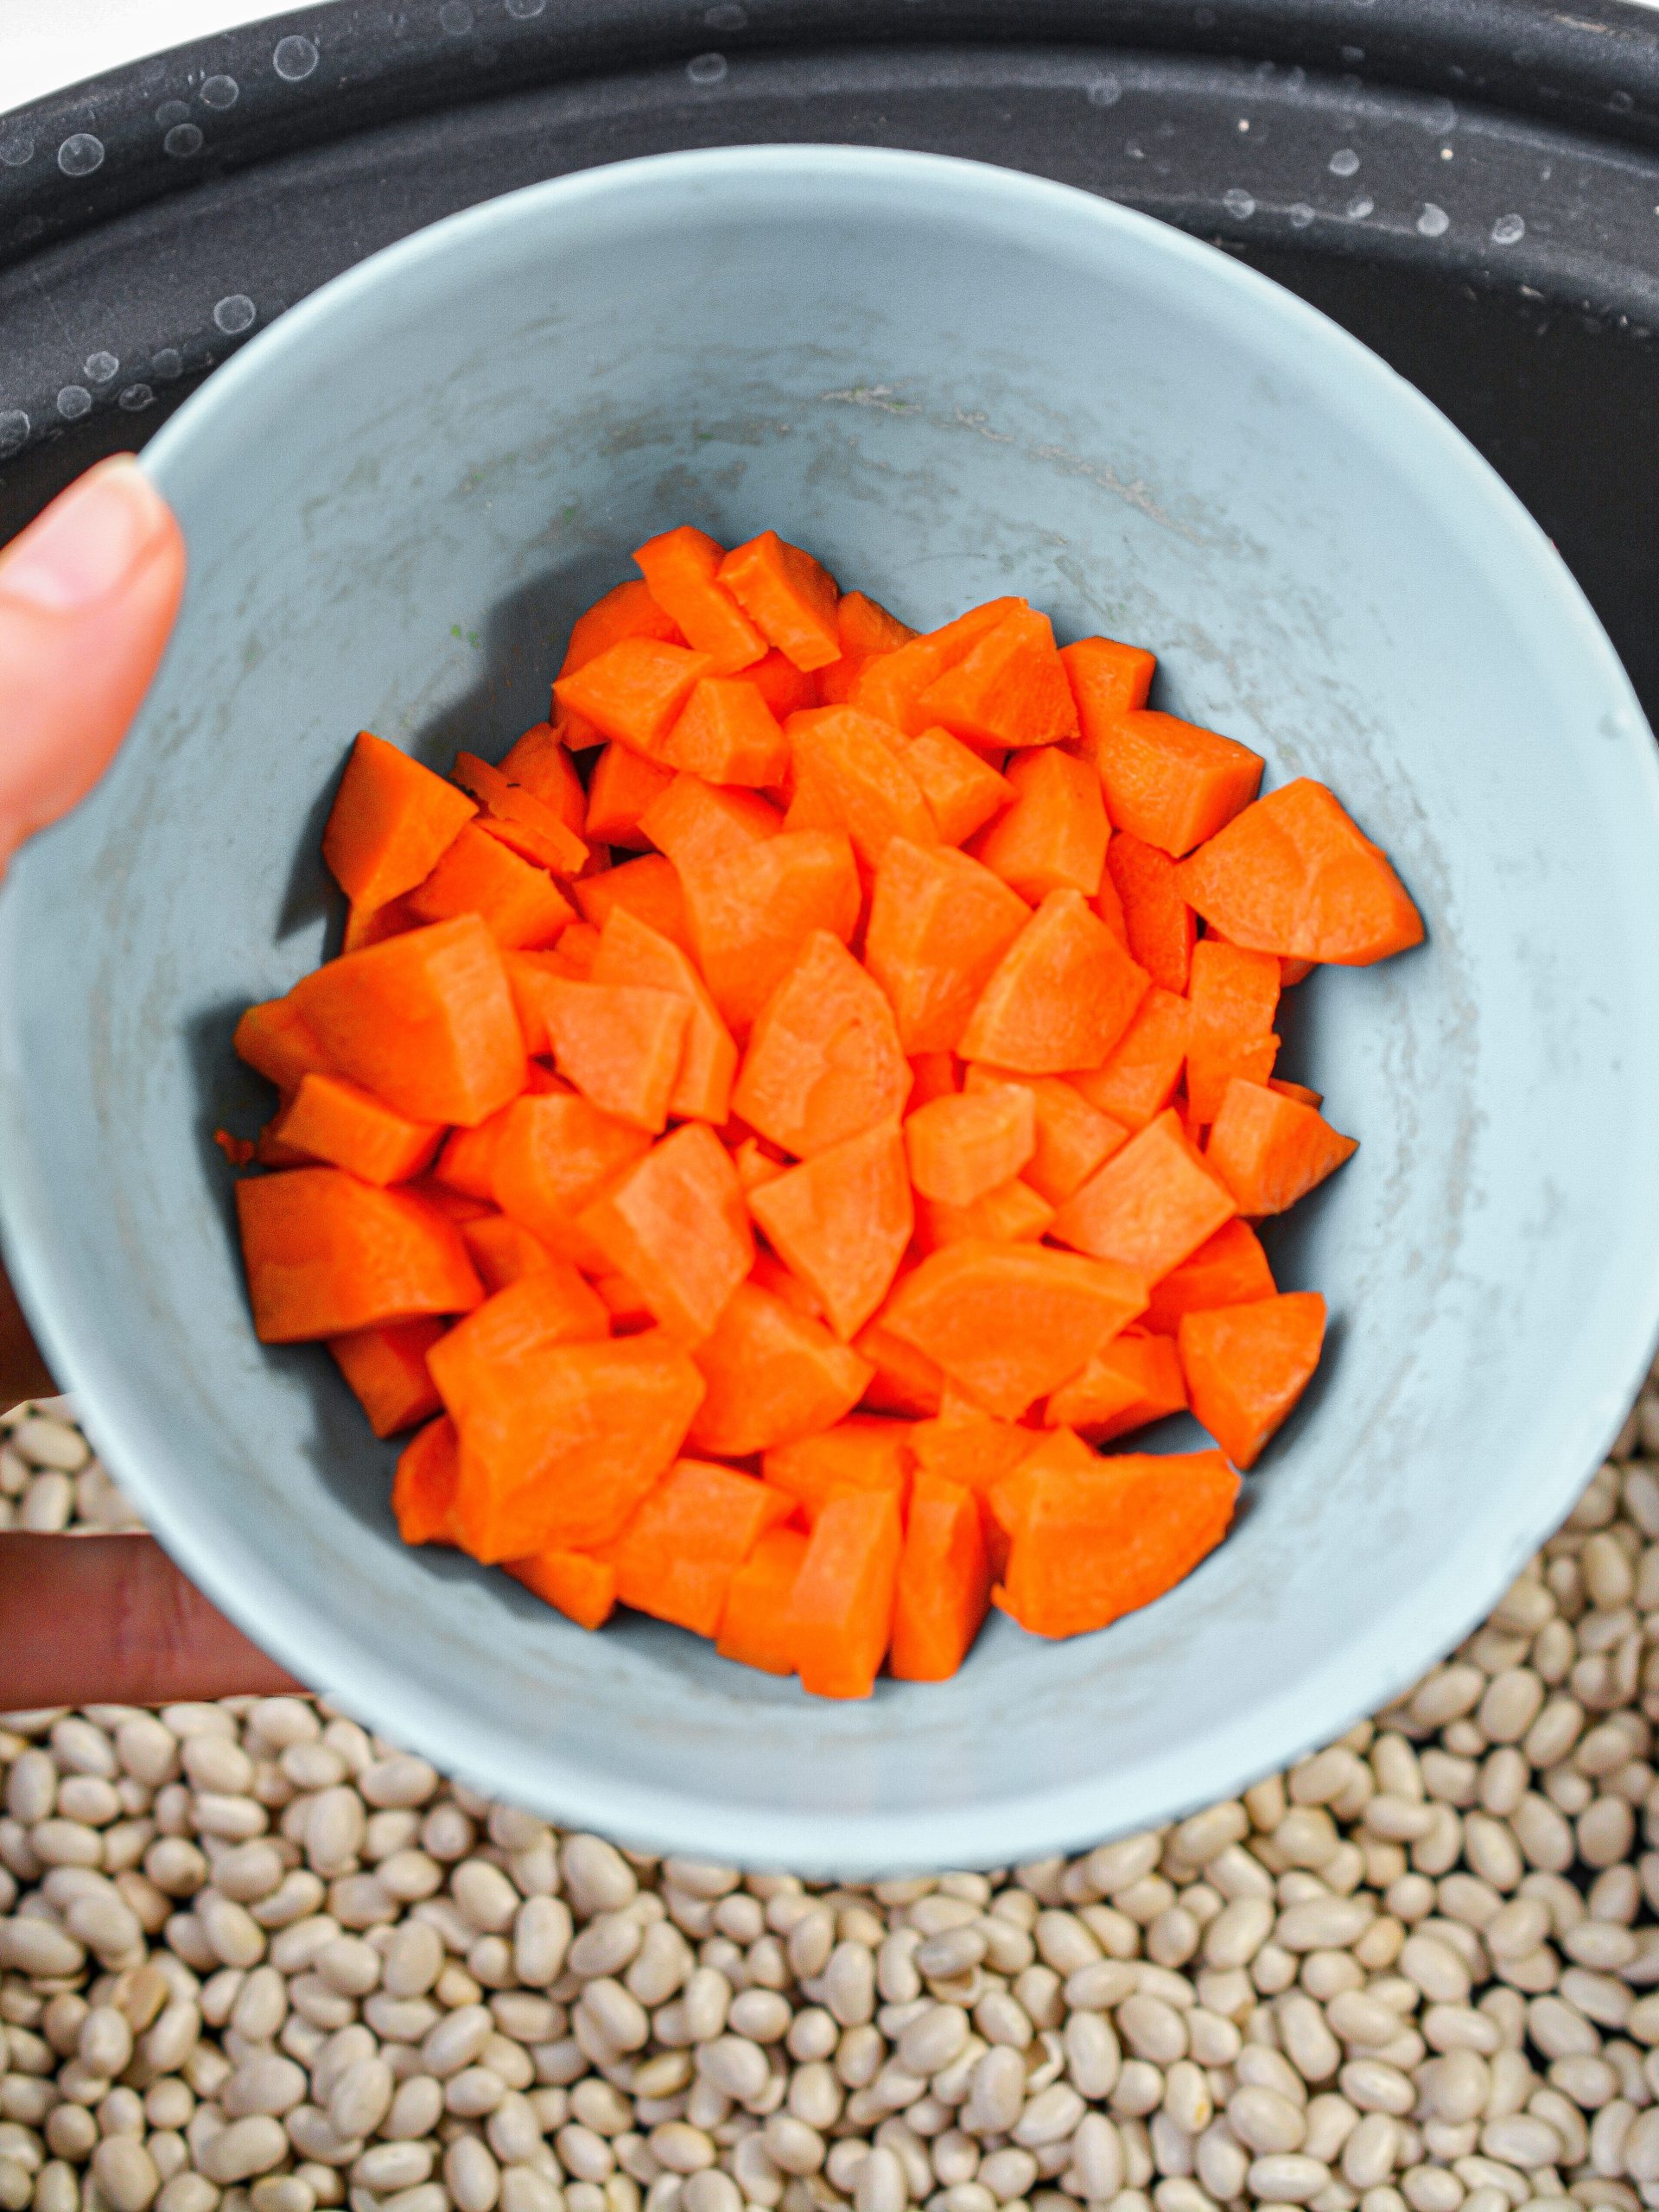 add ¾ cup of chopped carrots.